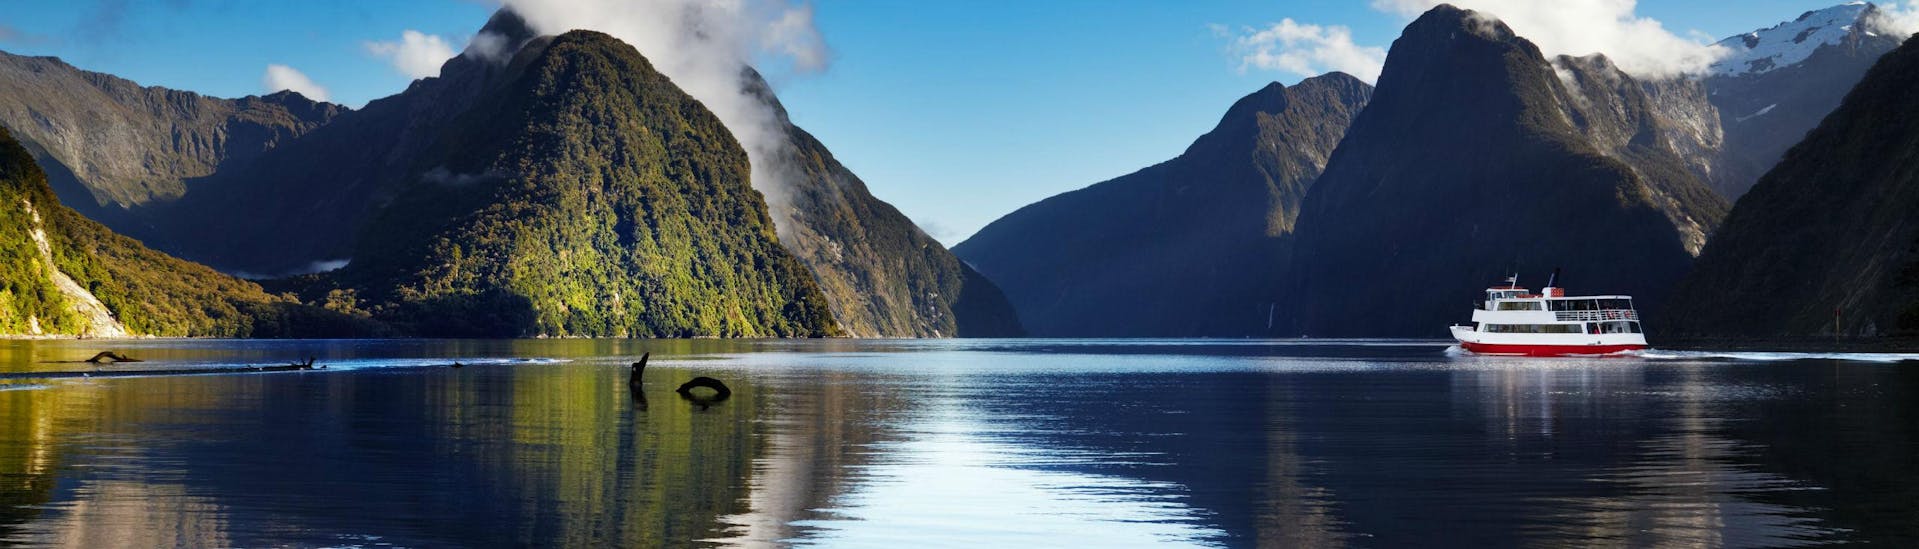 A boat trip near Queenstown is one of the highlights of many holiday-makers' visit to New Zealand.